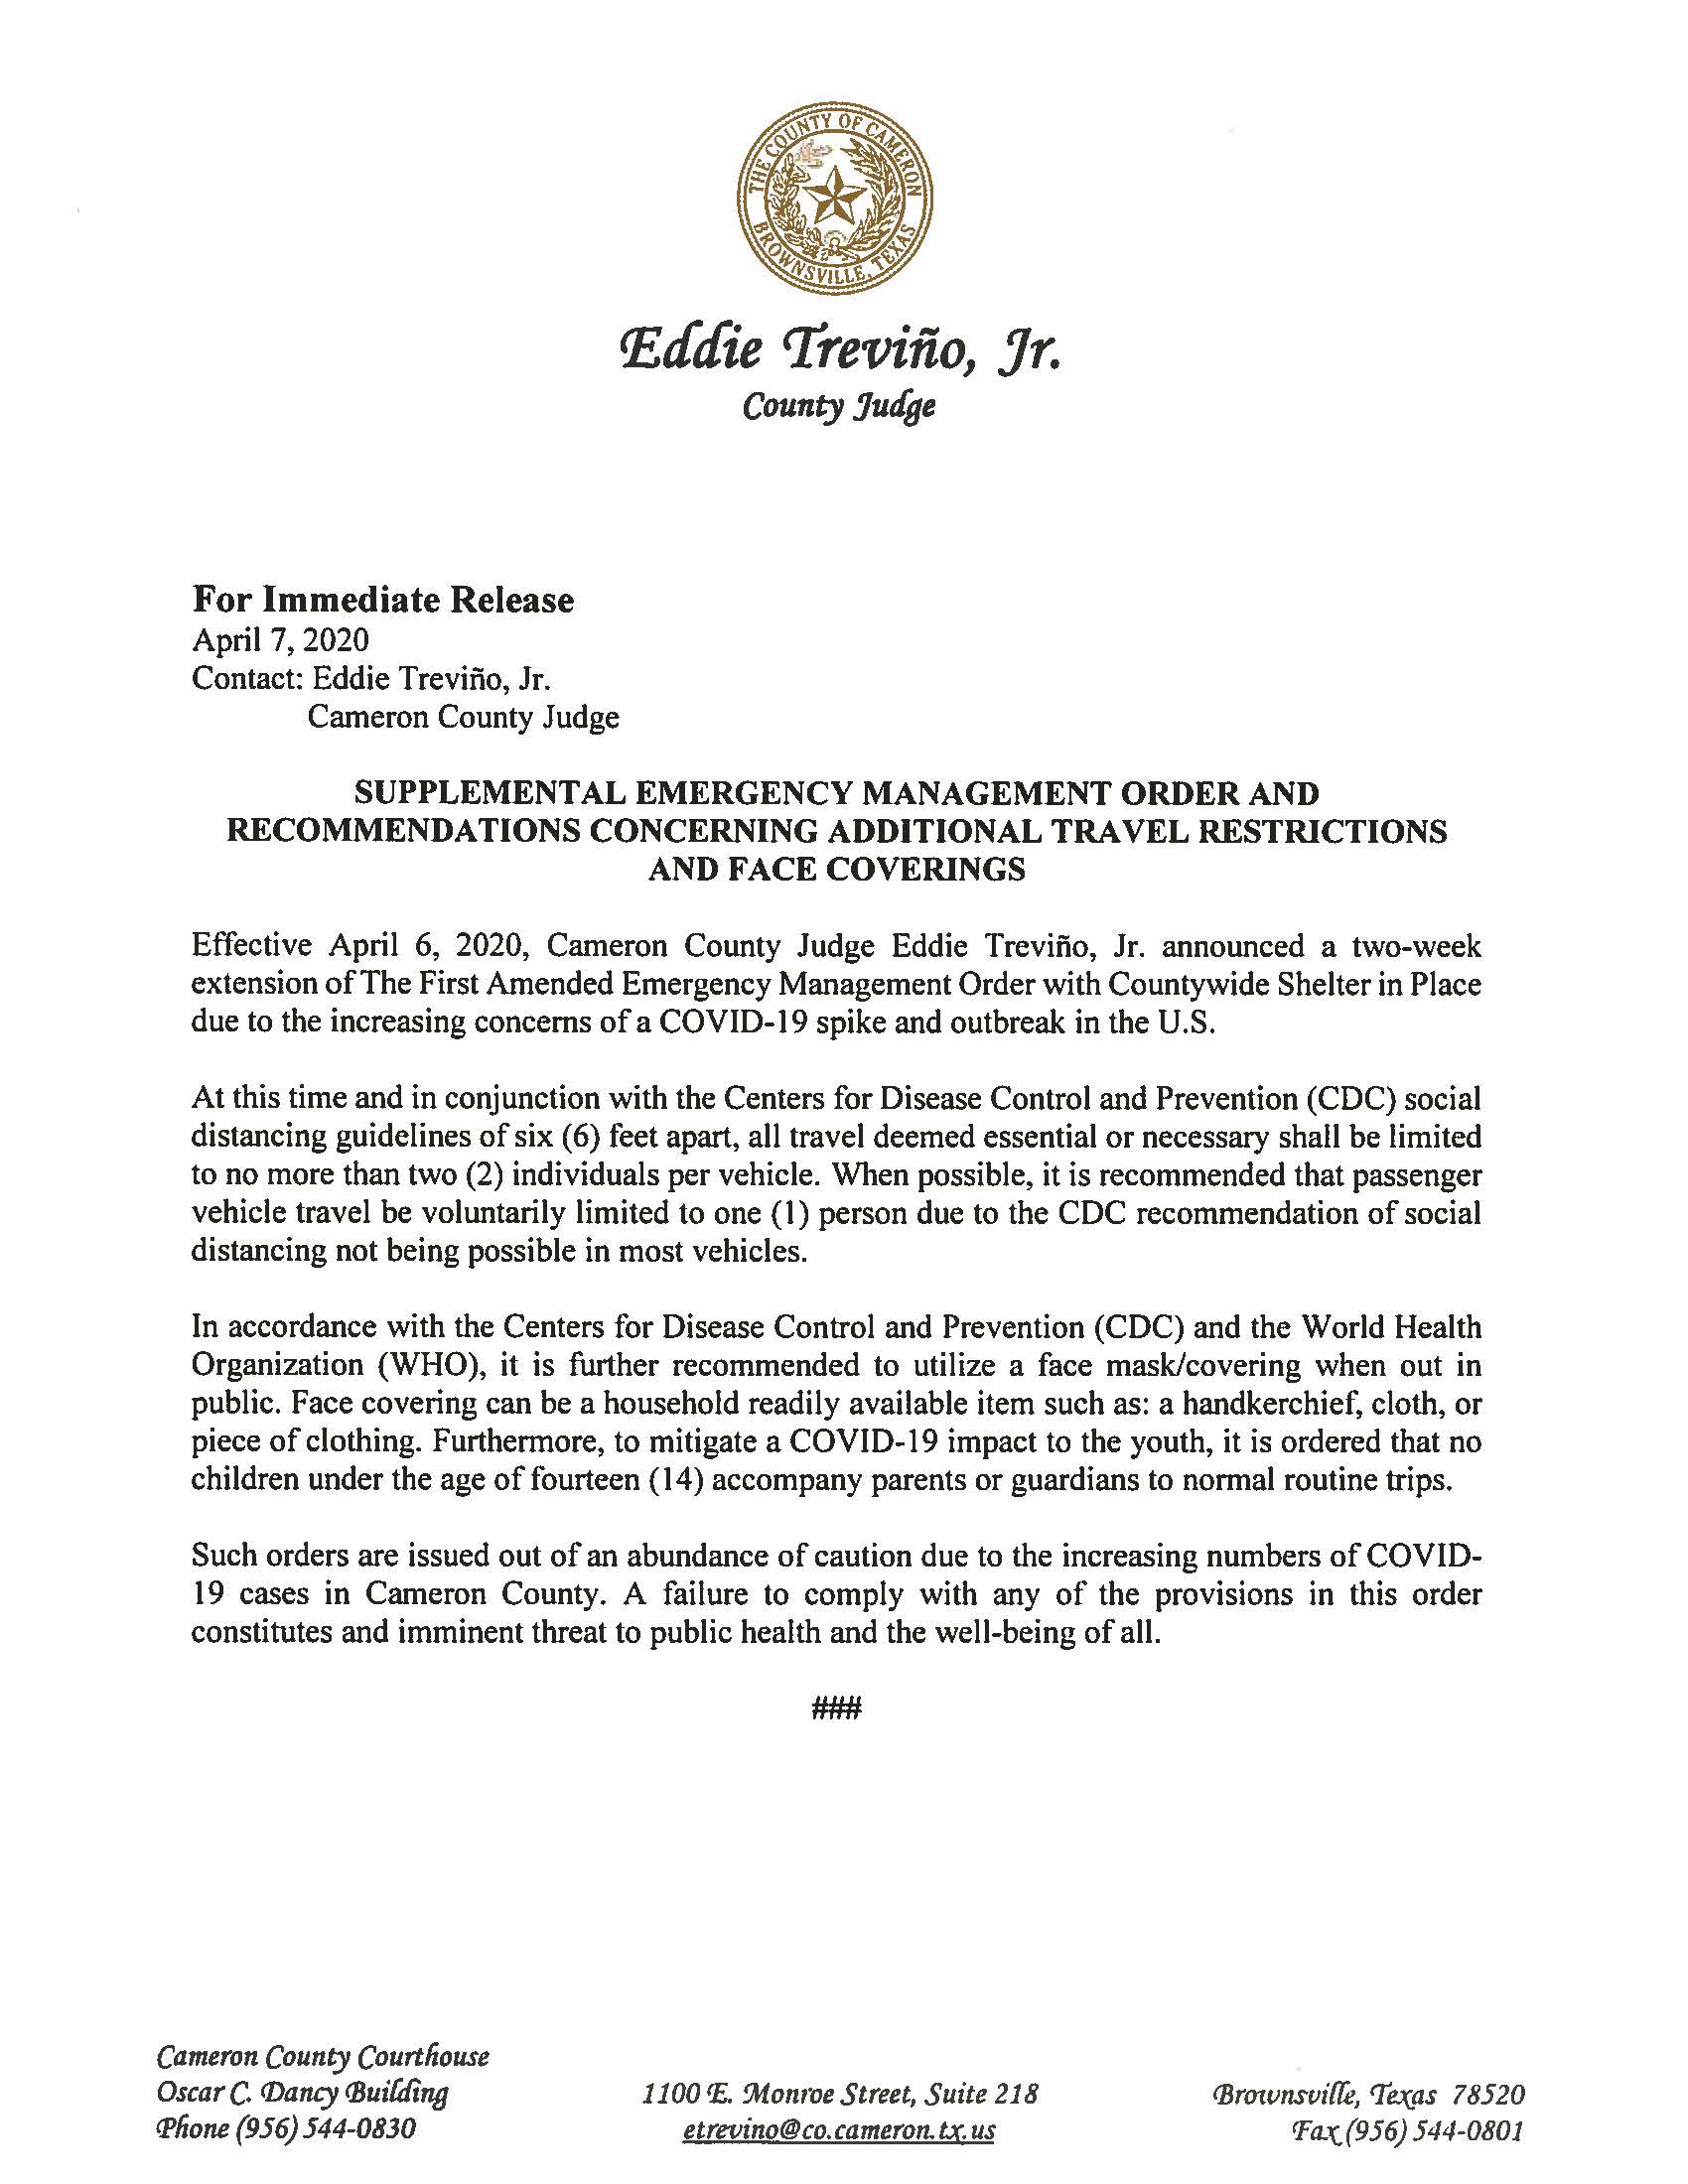 04.07.2020 For Immediate Release Supplemental Emgergency Management Order And Reccomendations Concerning Additional Travel Restrictions And Face Covering